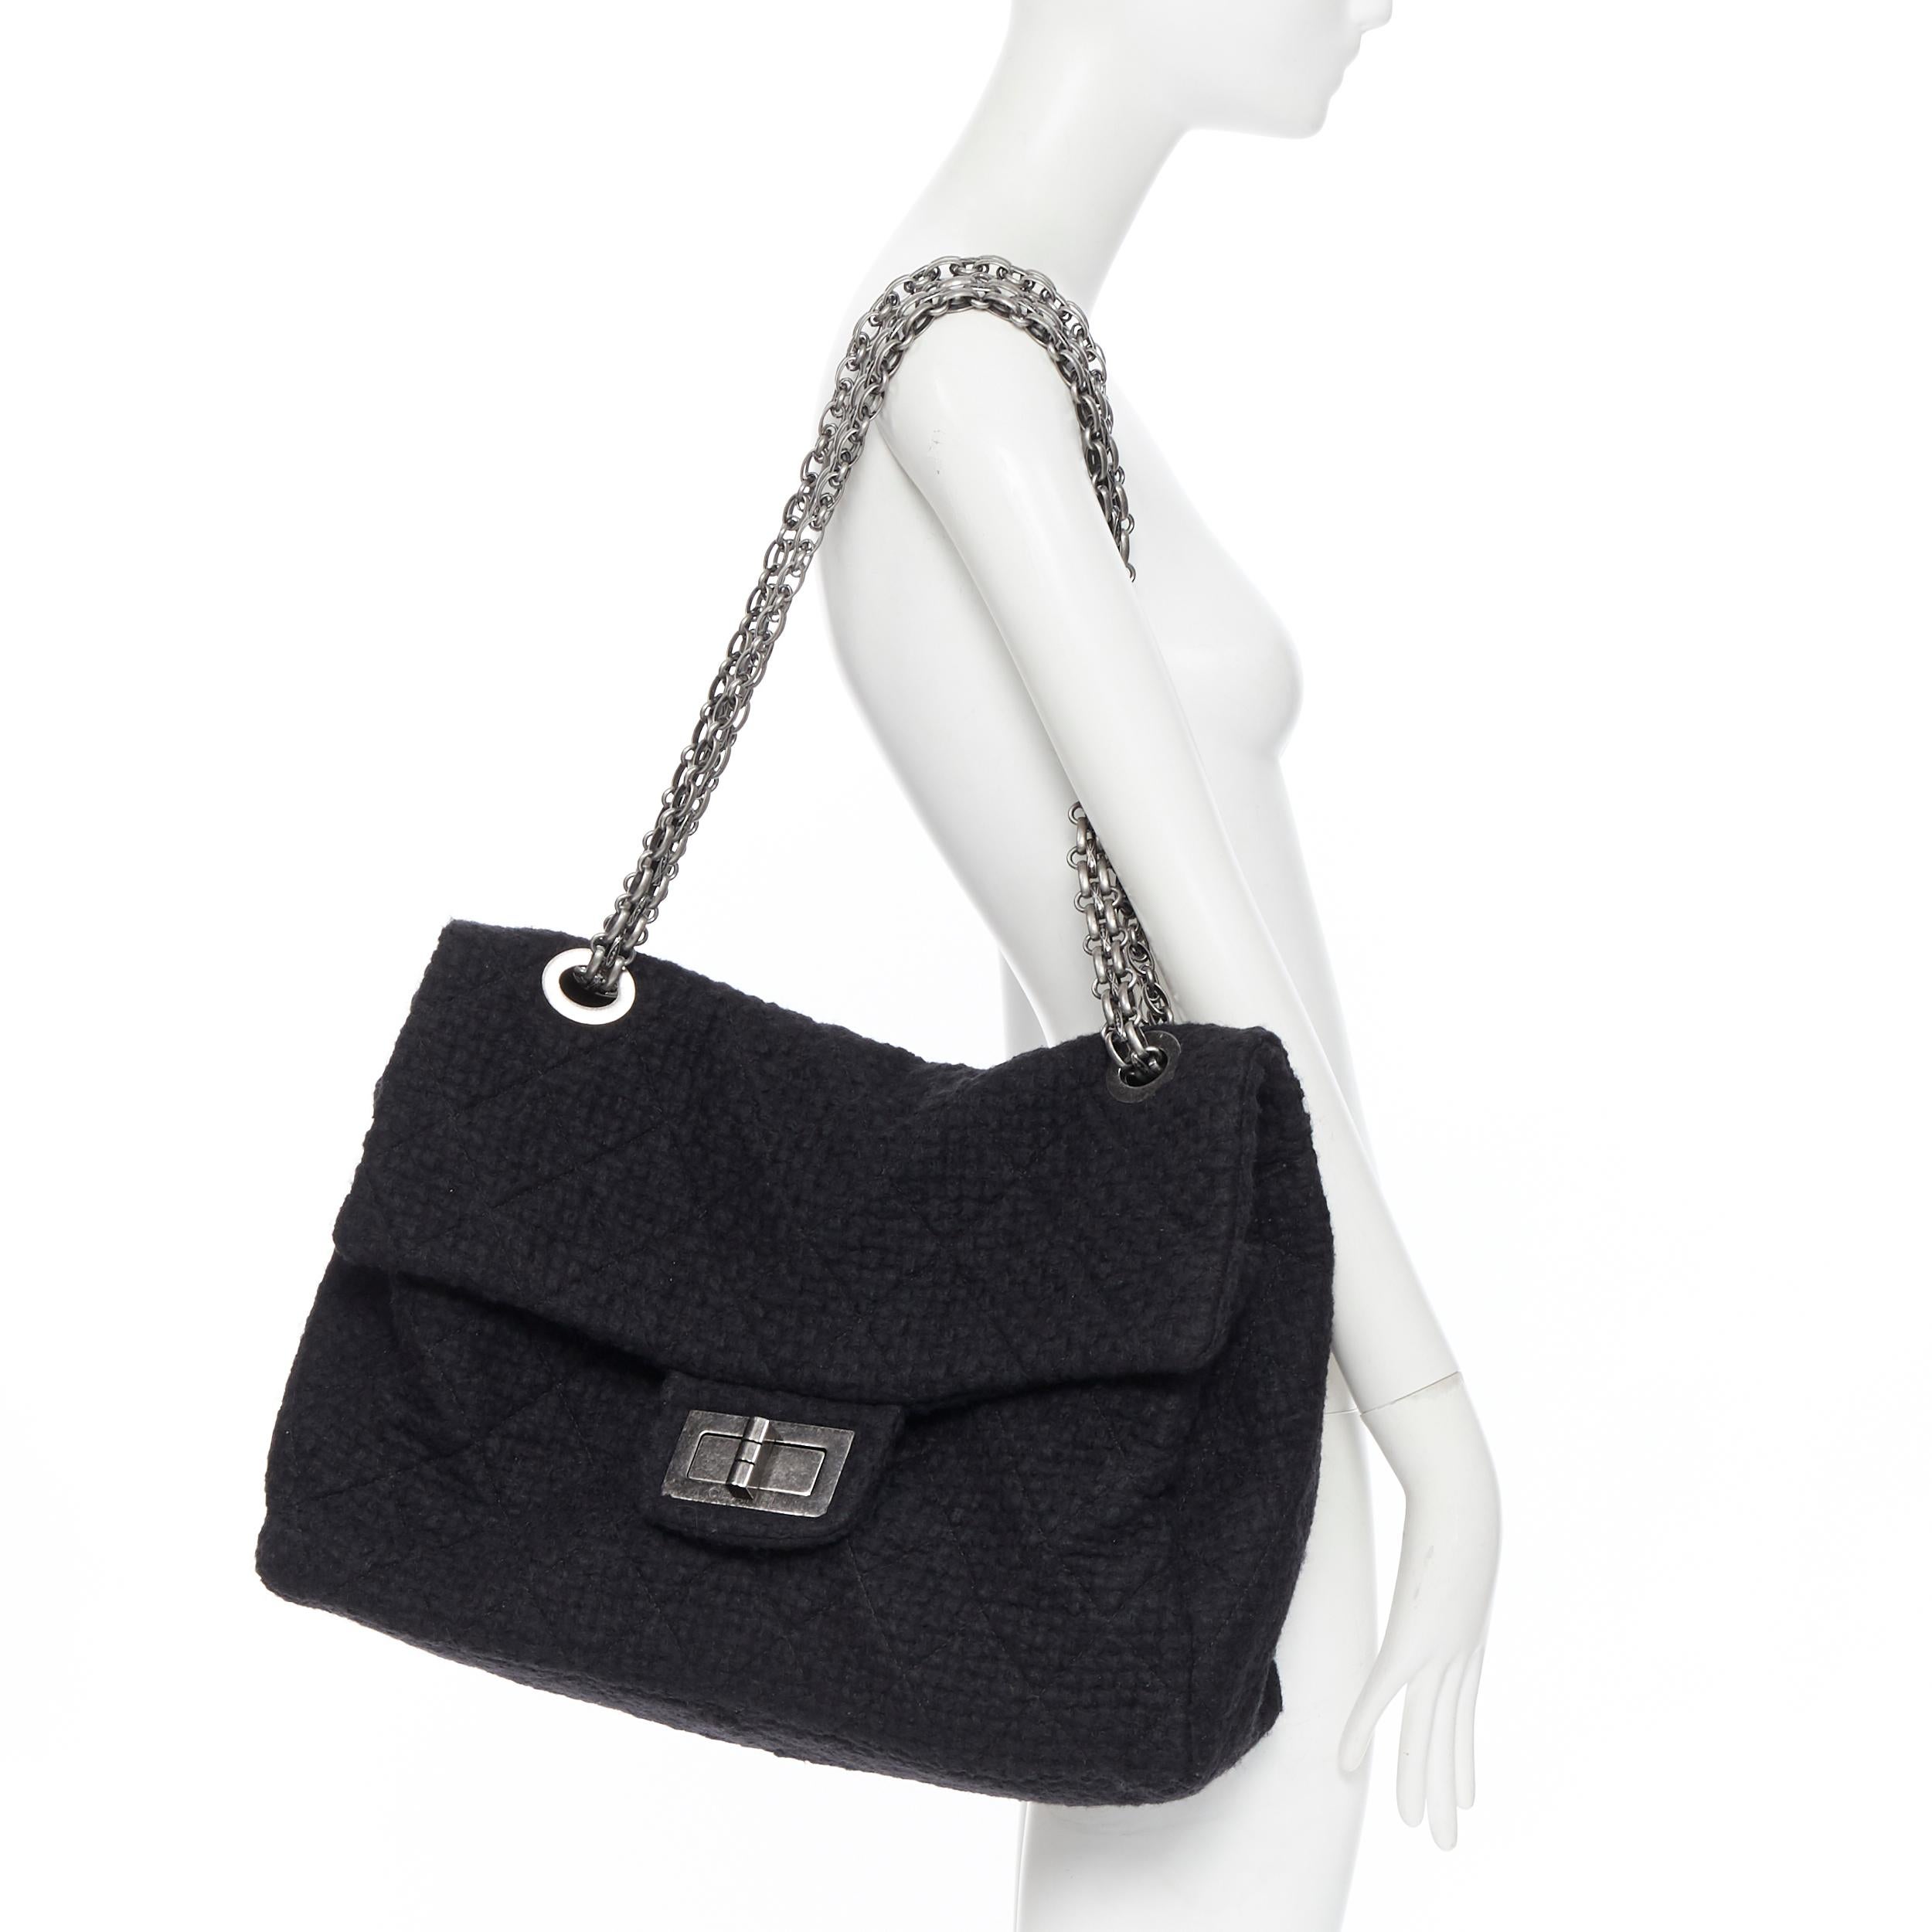 runway CHANEL 2.55 Reissue XXL black tweed quilted maxi silver chain flap bag
Brand: Chanel
Designer: Karl Lagerfeld
Model Name / Style: Reissue XXL
Material: Tweed
Color: Black
Pattern: Solid
Closure: Turnlock
Extra Detail: Extra large size.